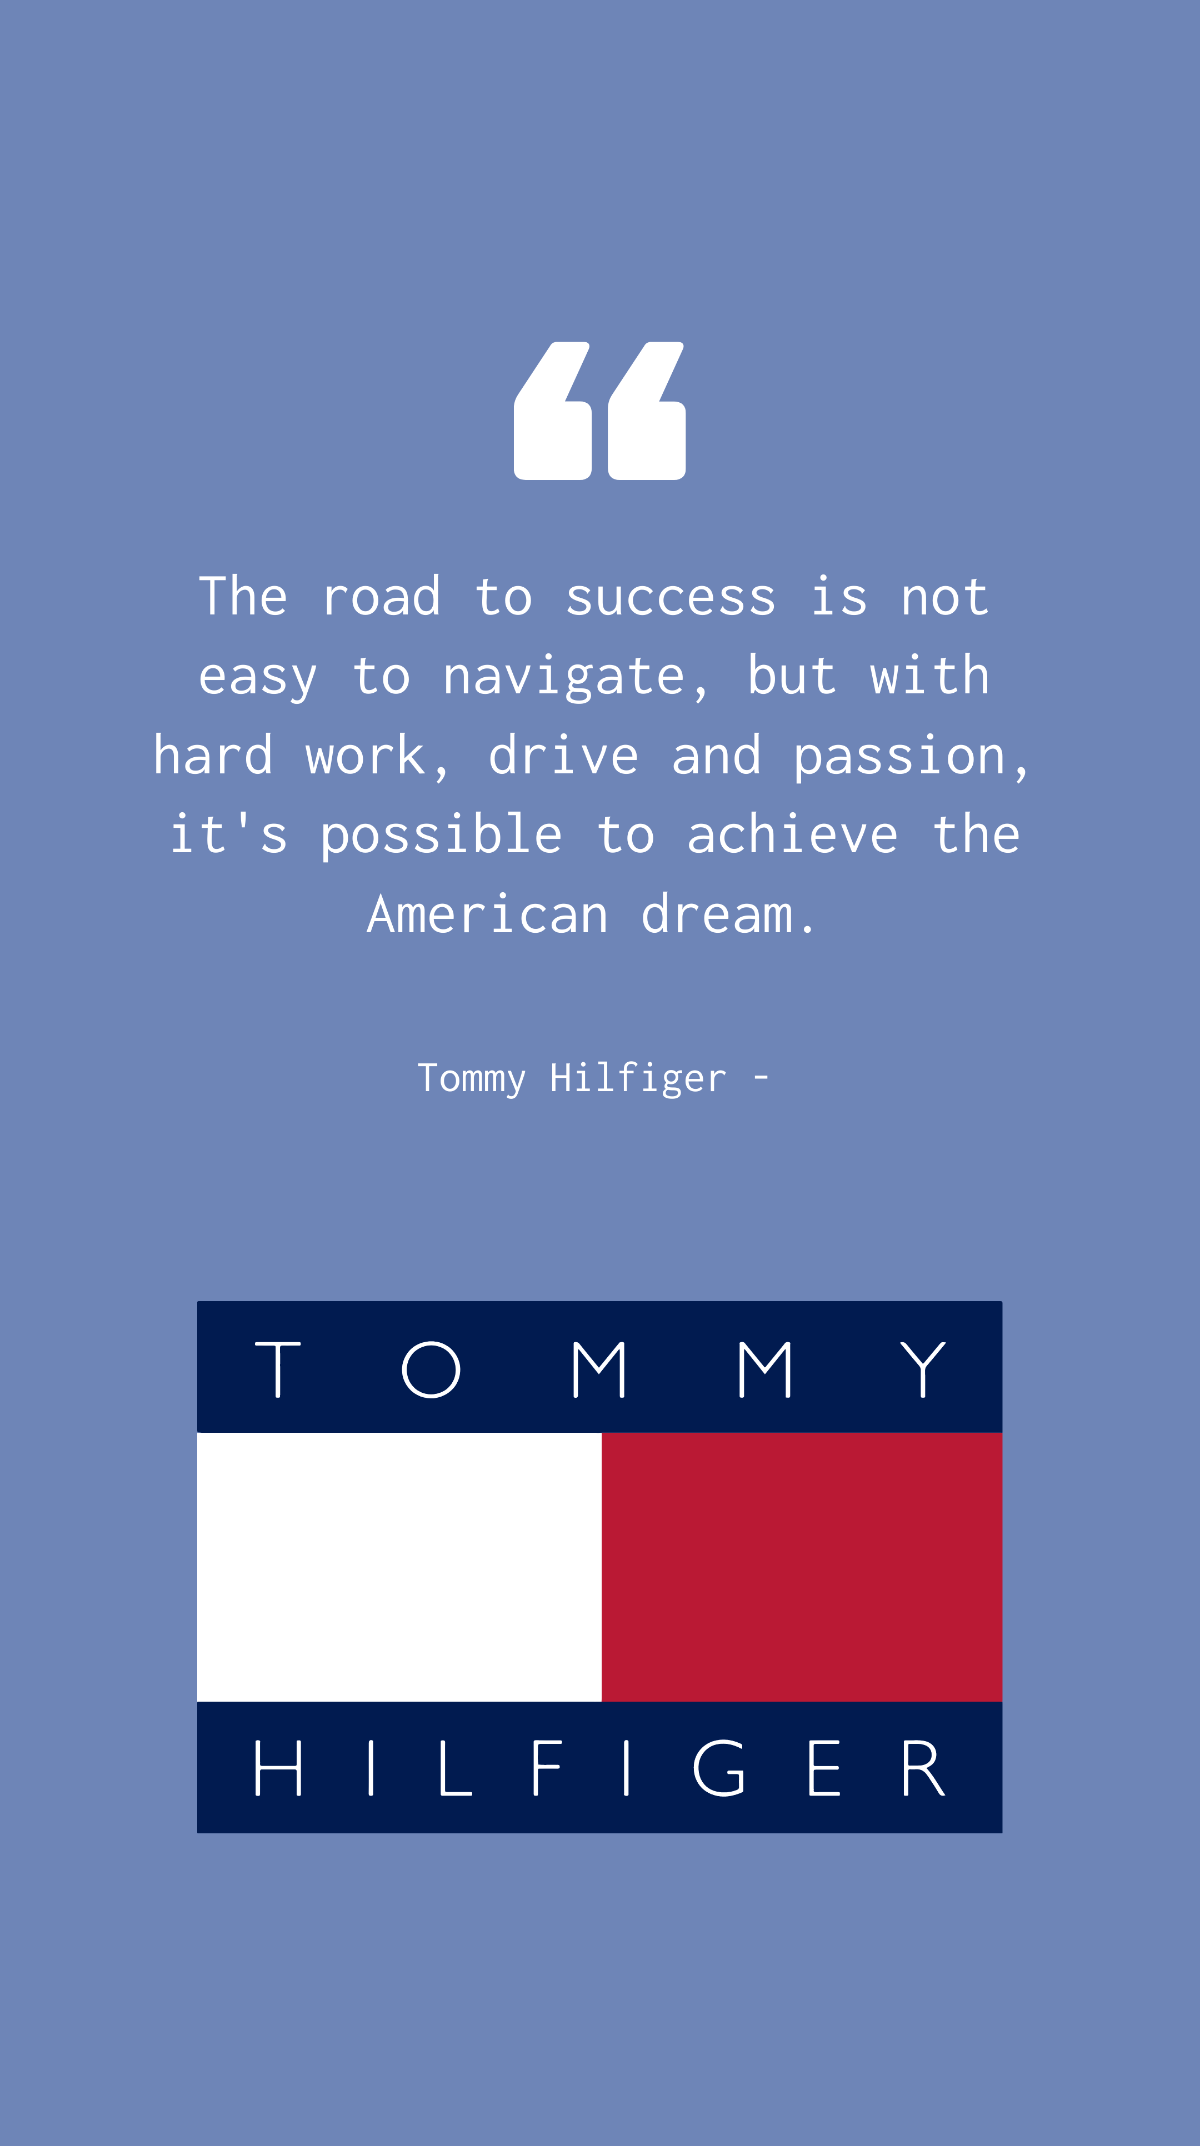 Free Tommy Hilfiger - The road to success is not easy to navigate, but with hard work, drive and passion, it's possible to achieve the American dream. Template